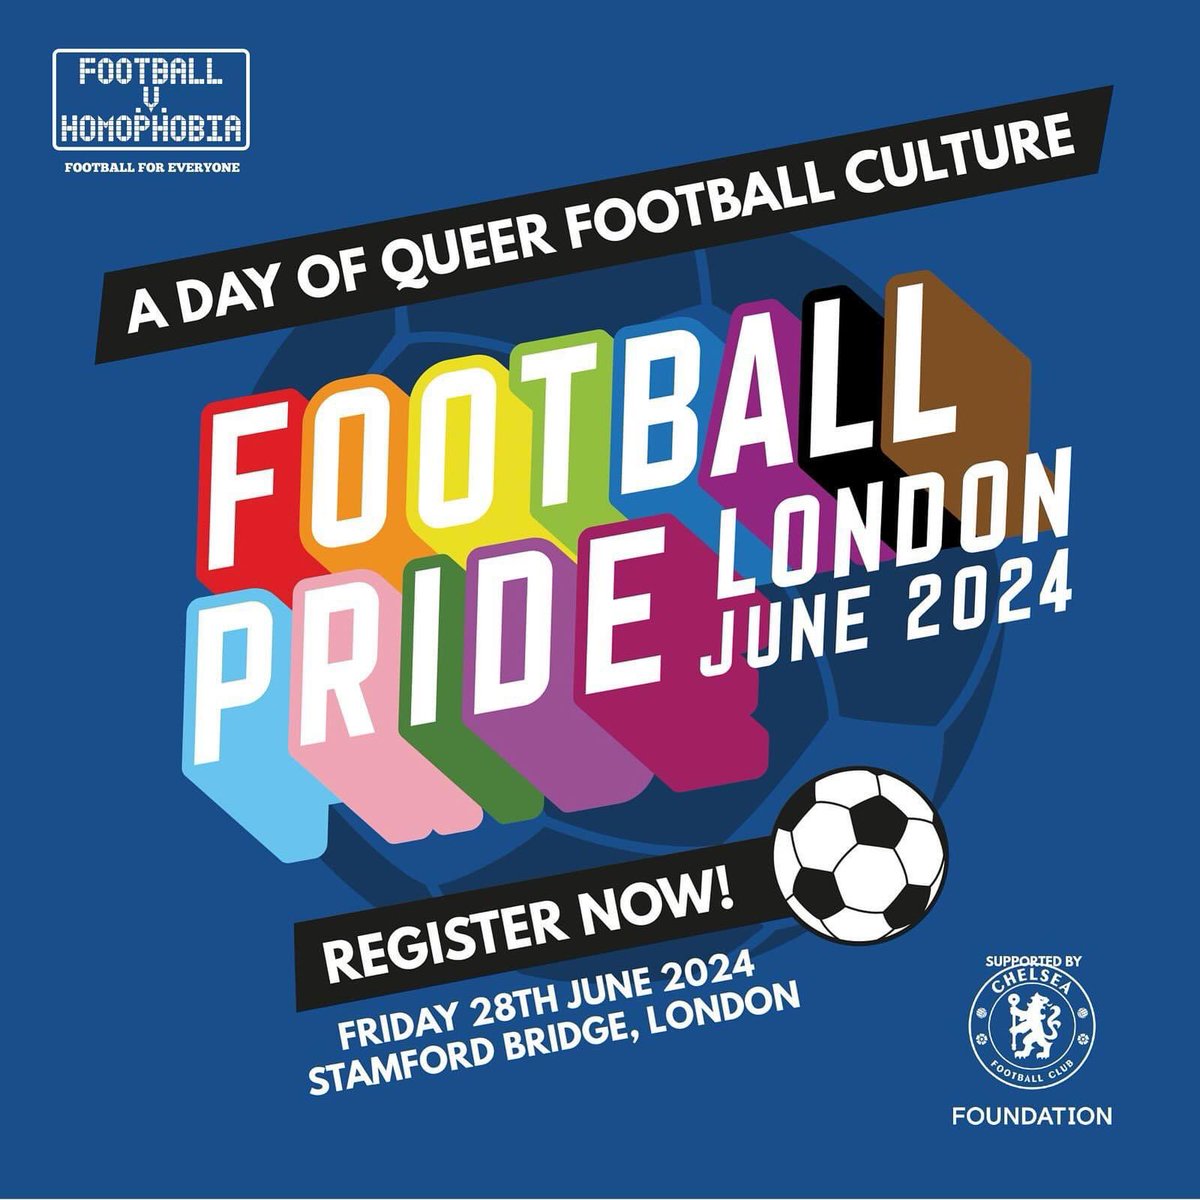 NEW: The superb play PITCH by @NovTheatre will be performed at #FootballPride, the all-day football celebration from @FvHtweets taking place at Chelsea FC on Friday 28 June. Tickets are on sale now! 🏳️‍🌈⚽️🏳️‍⚧️ All the info 👉 sportsmedialgbt.com/football-pride… #PrideinLondon #LGBTQfootball